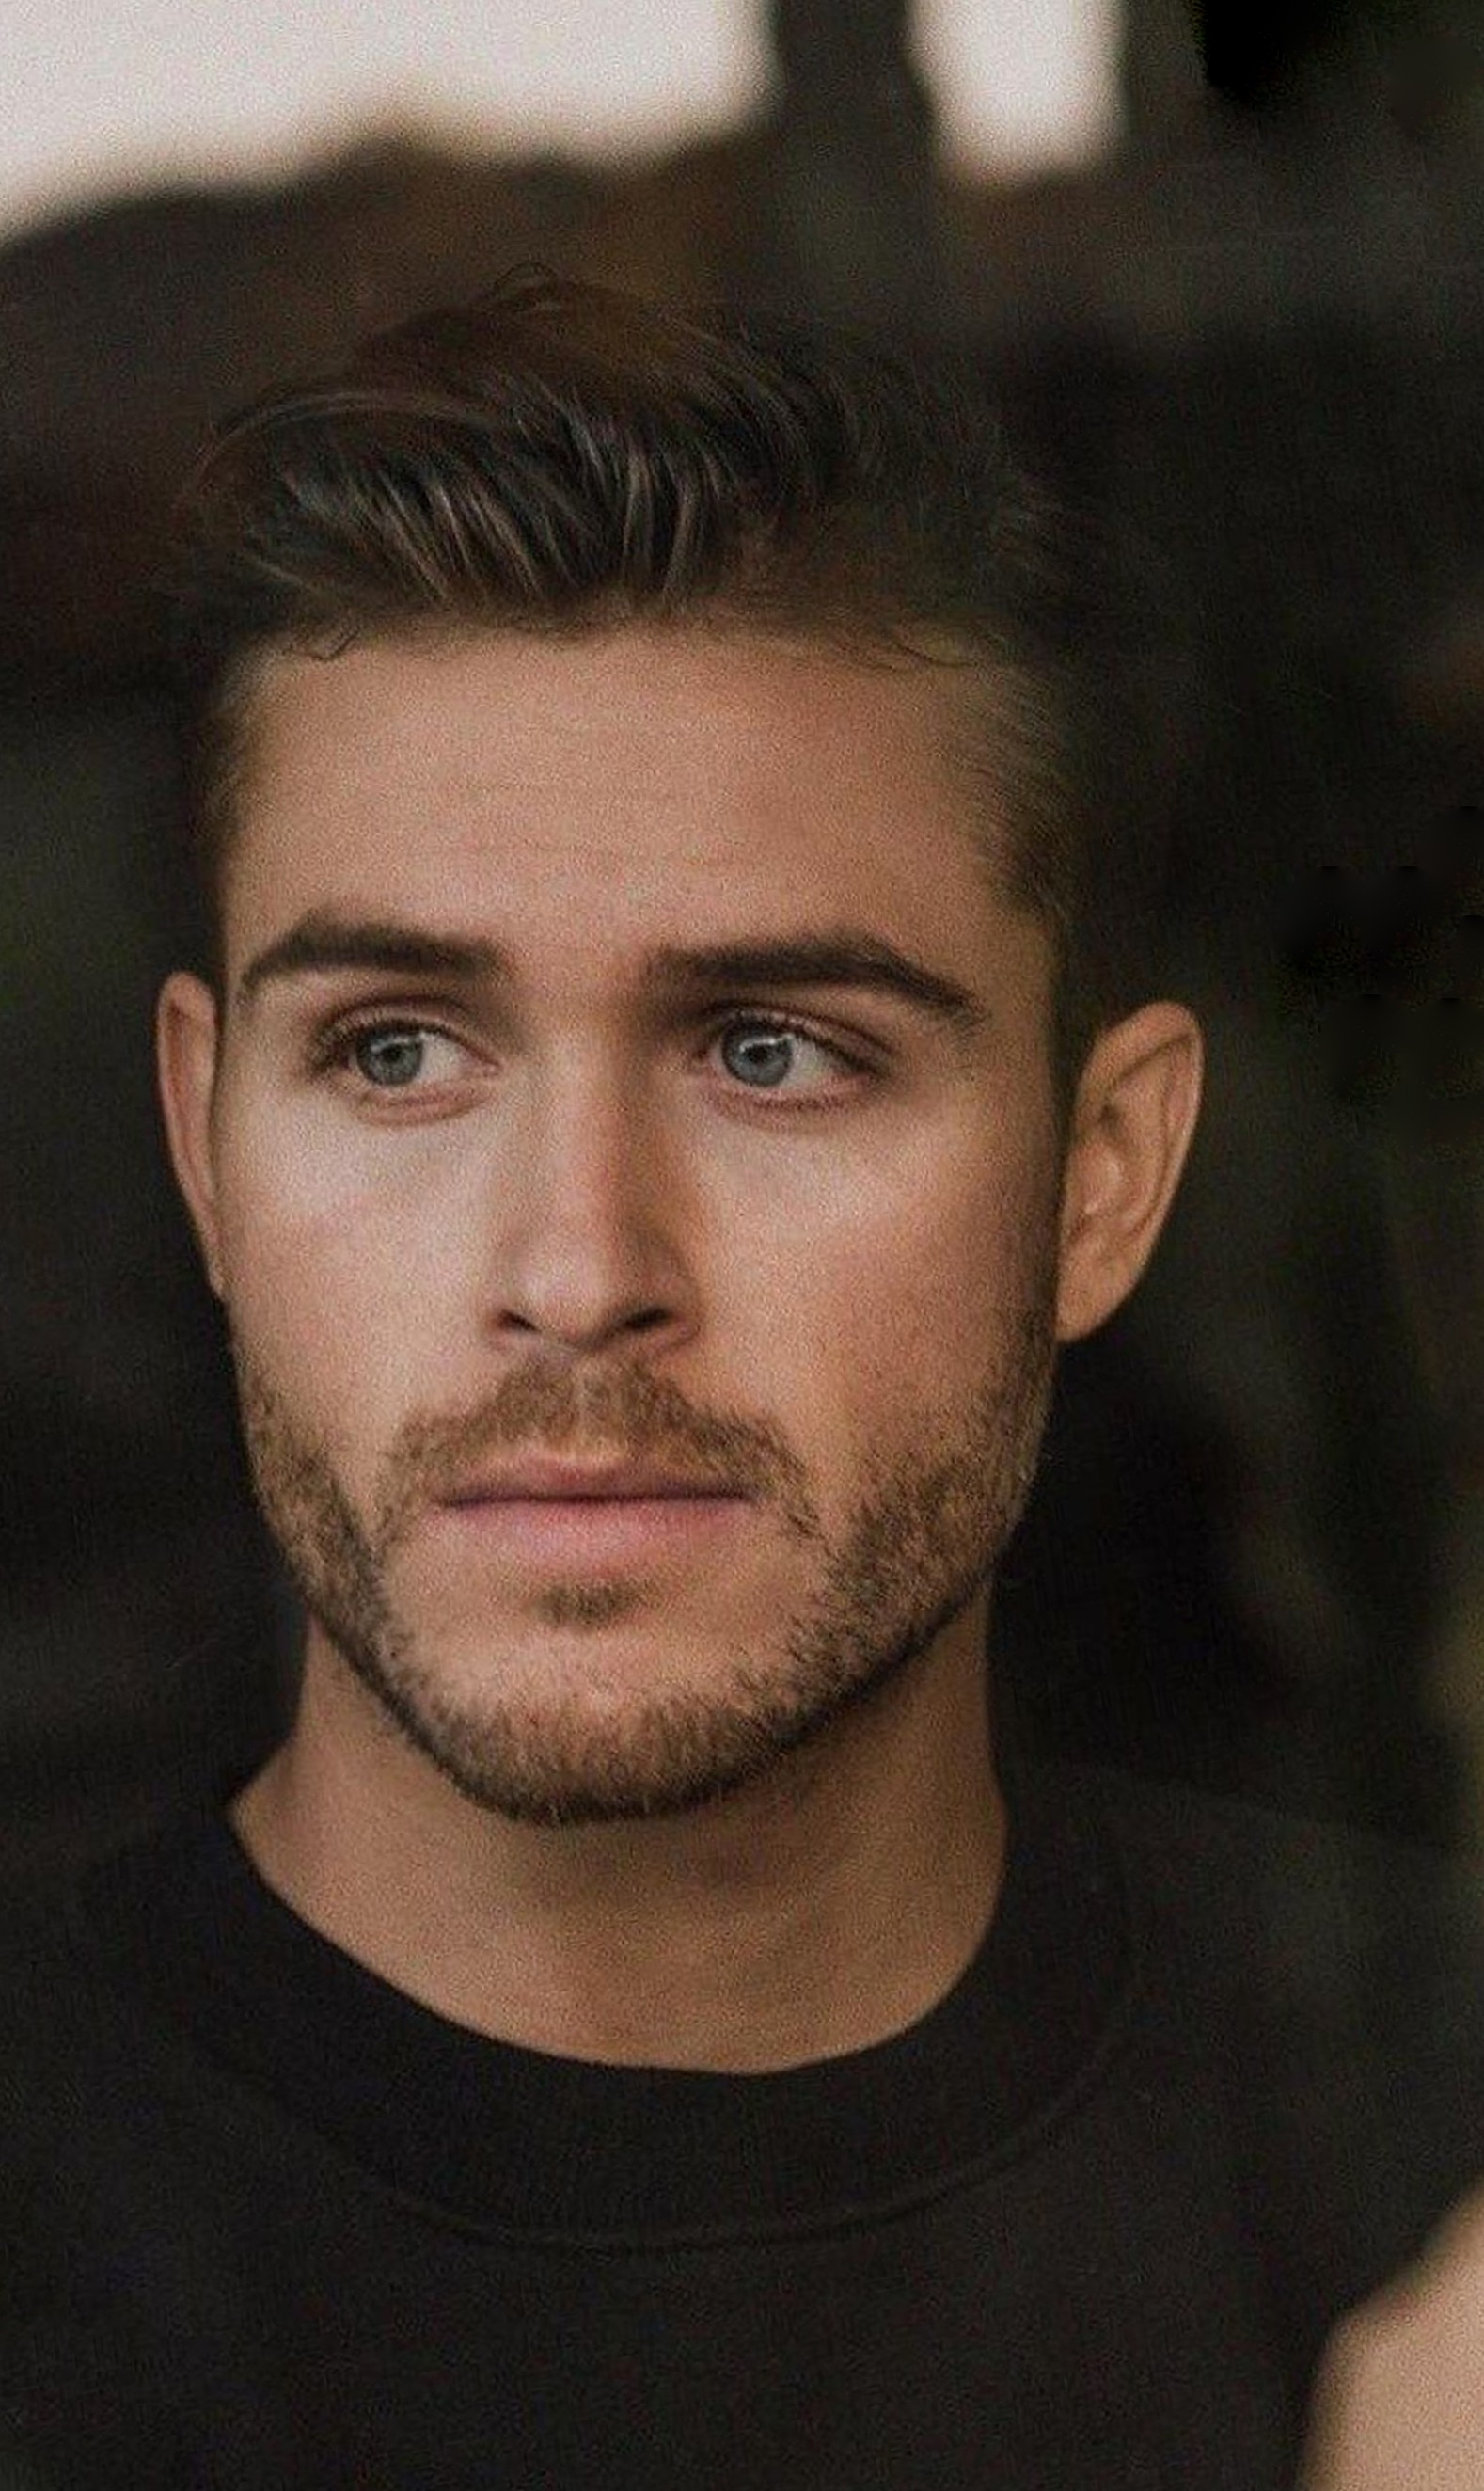 72 Short Beard Styles for Your Perfect Look at Any Age